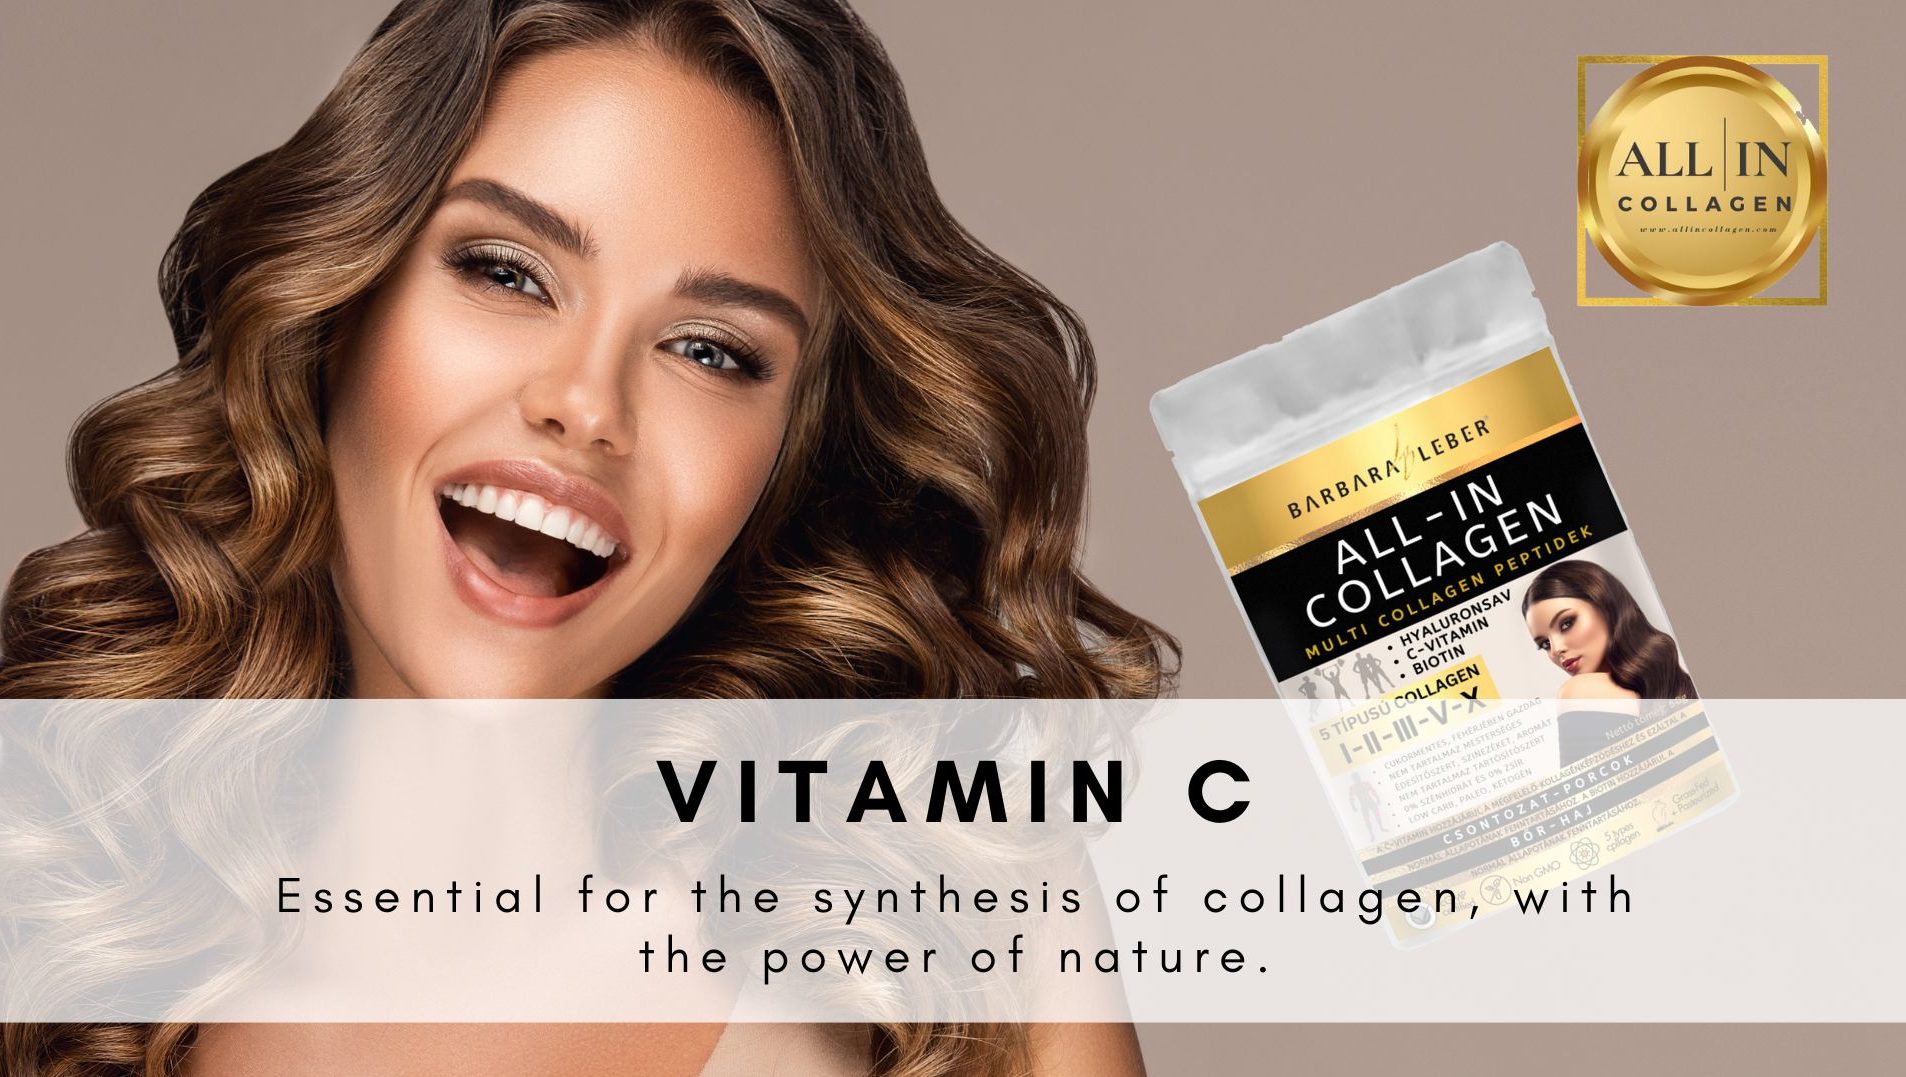 Vitamin C is important for the incorporation of collagen.